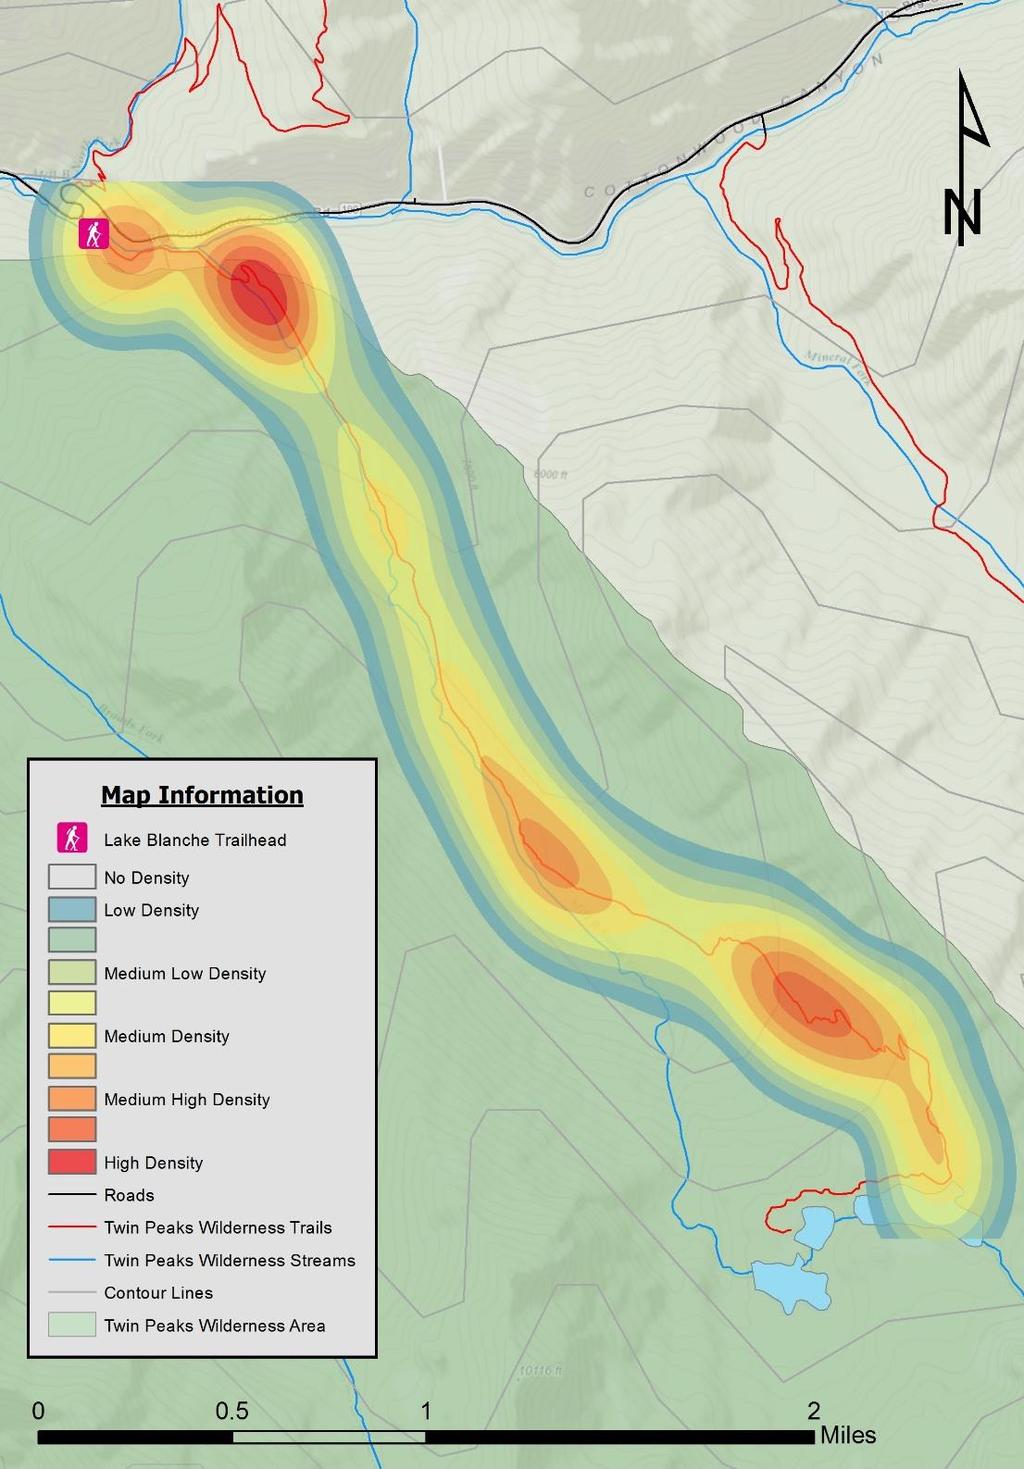 18 Figure 3: Heat Map of Total Group Encounter Locations on Lake Blanche Trail Figure 3 shows density of the total group encounter locations on the Lake Blanche trail.